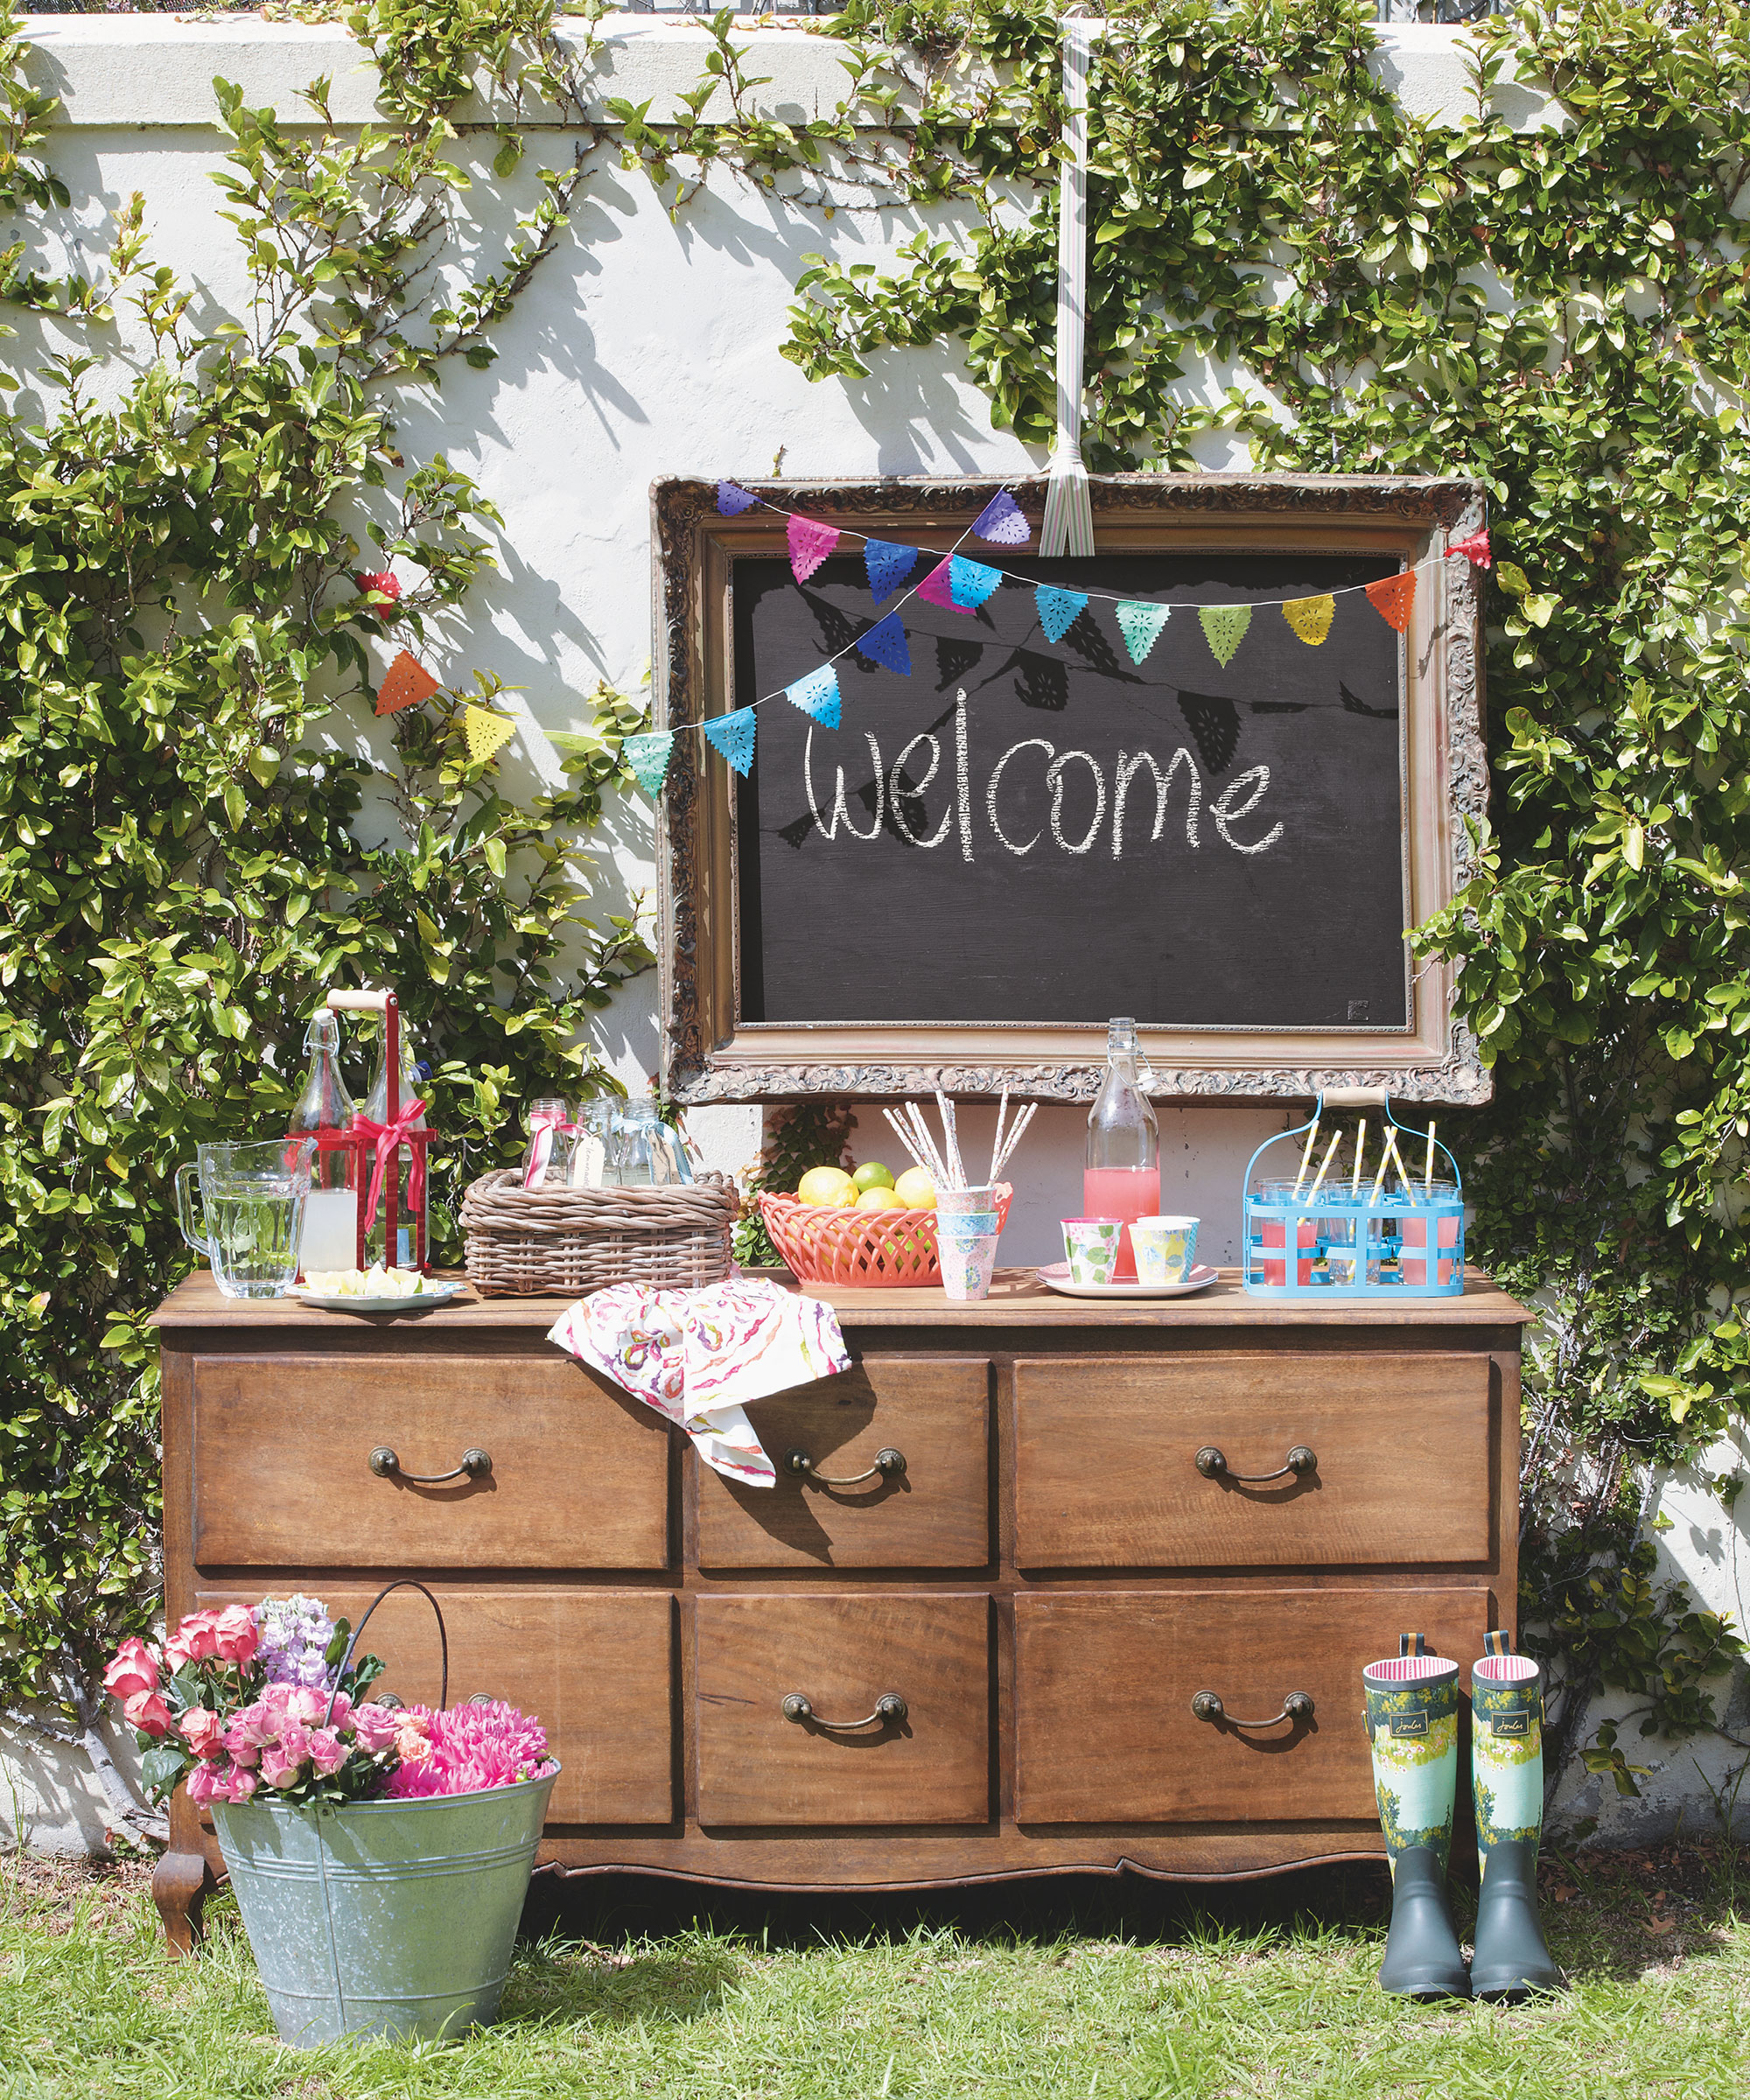 A wooden chest of drawers with food and drink on it in front of a Welcome sign in a garden